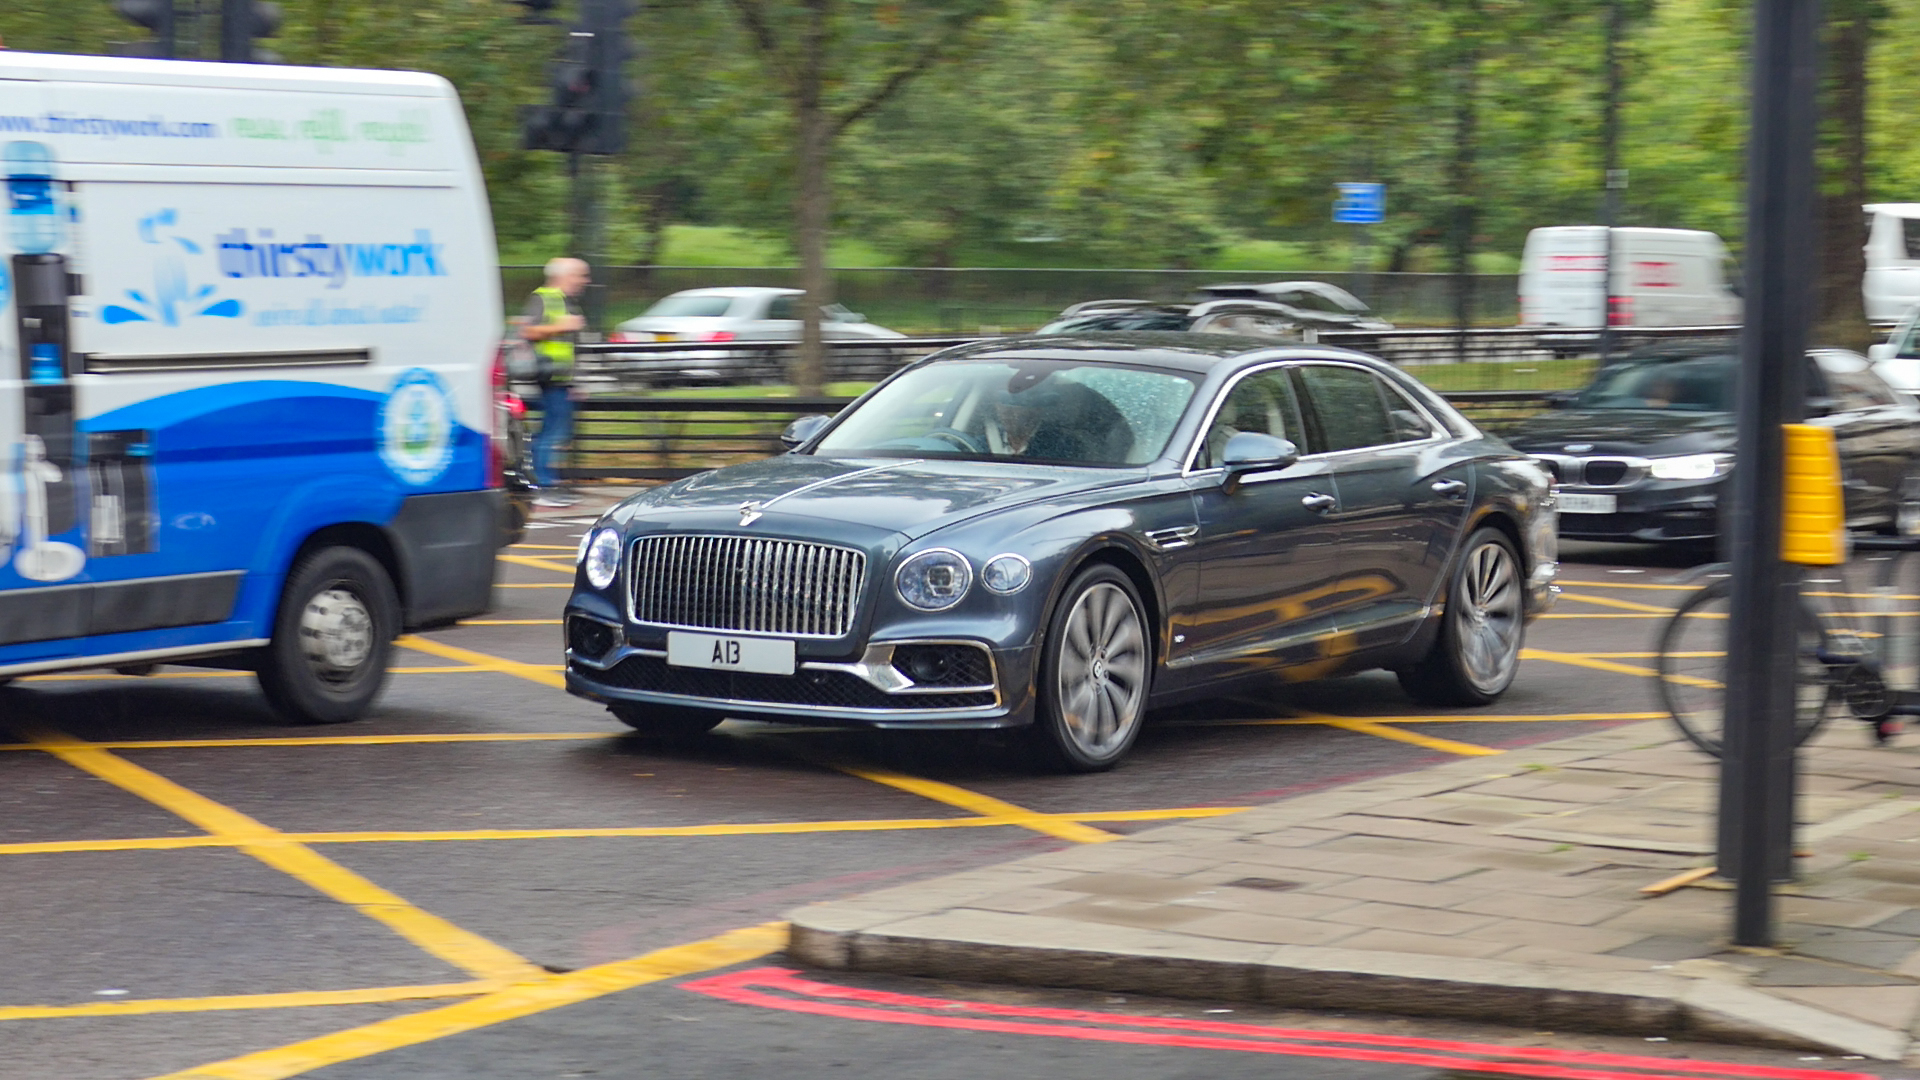 Bentley Flying Spur - A13 (GB)